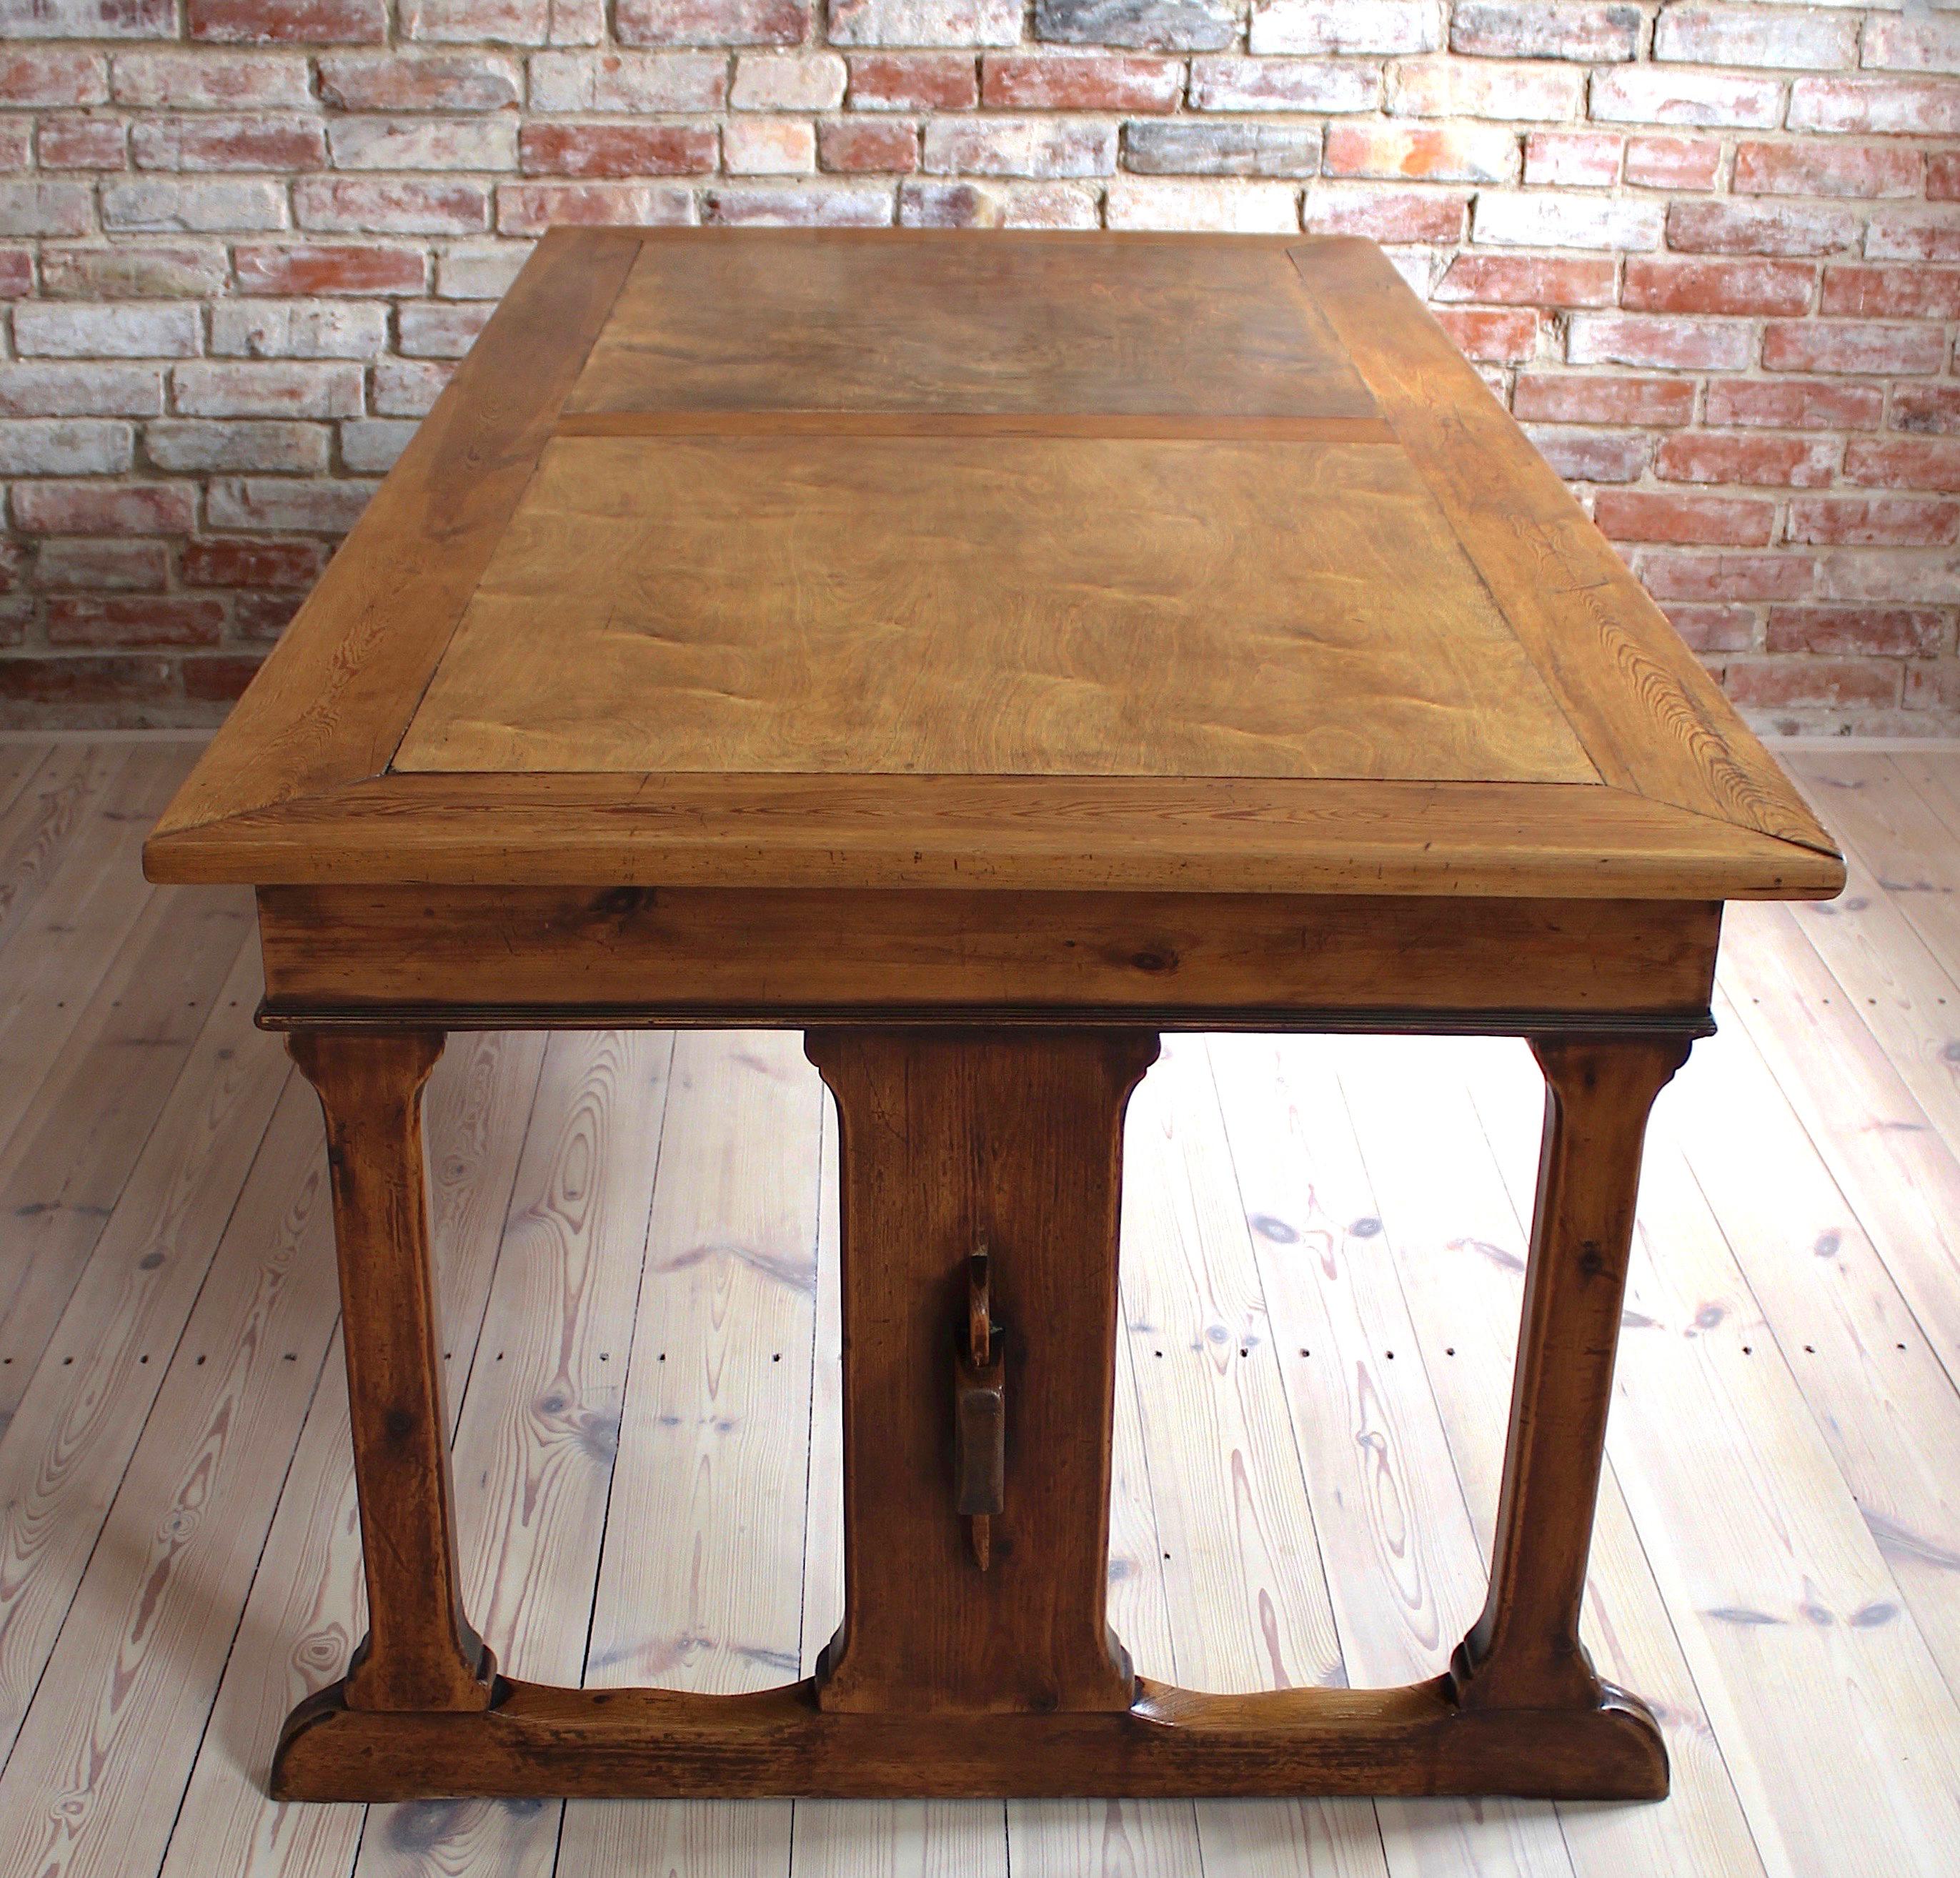 This beautiful piece of furniture served for many years as a library table. The solid oak base is very probable to be older than the beech top. The table is after a subtle renovation that allowed to preserve some historical traces of use, signs of